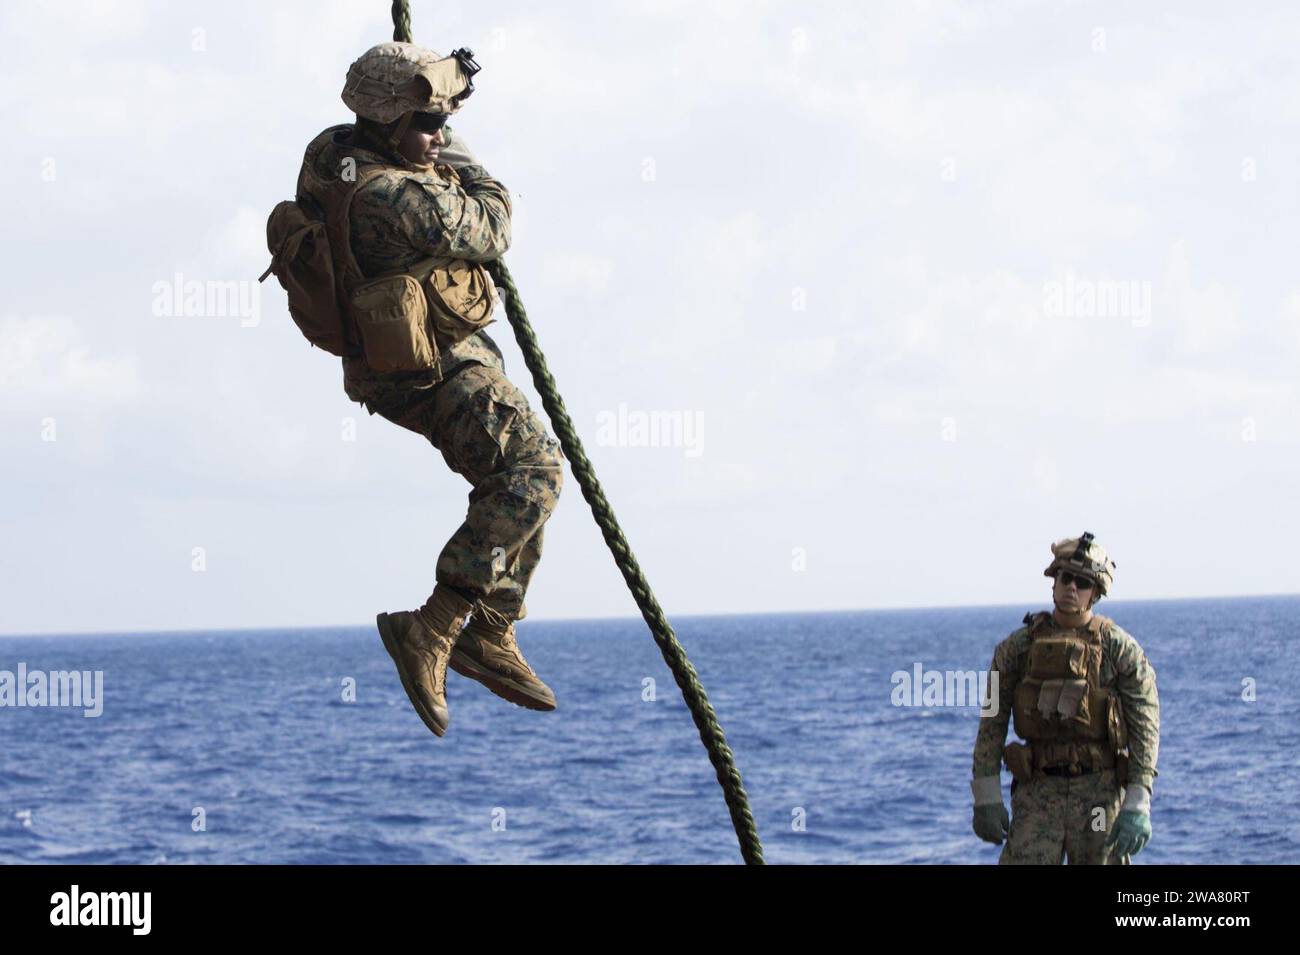 US military forces. 160903MK246-003 MEDITERRANEAN SEA (Sept. 3, 2016) Marines assigned to Alpha Company, Battalion Landing Team, 1st Battalion, 6th Marine Regiment, 22nd Marine Expeditionary Unit (MEU), conduct fast rope training aboard the amphibious assault ship USS Wasp (LHD 1) Sept. 3, 2016. The 22nd MEU, deployed with the Wasp Amphibious Ready Group, is conducting naval operations in the U.S. 6th Fleet area of operations in support of U.S. national security interests in Europe and Africa. (U.S. Marine Corps photo by Cpl. John A. Hamilton Jr.) Stock Photo